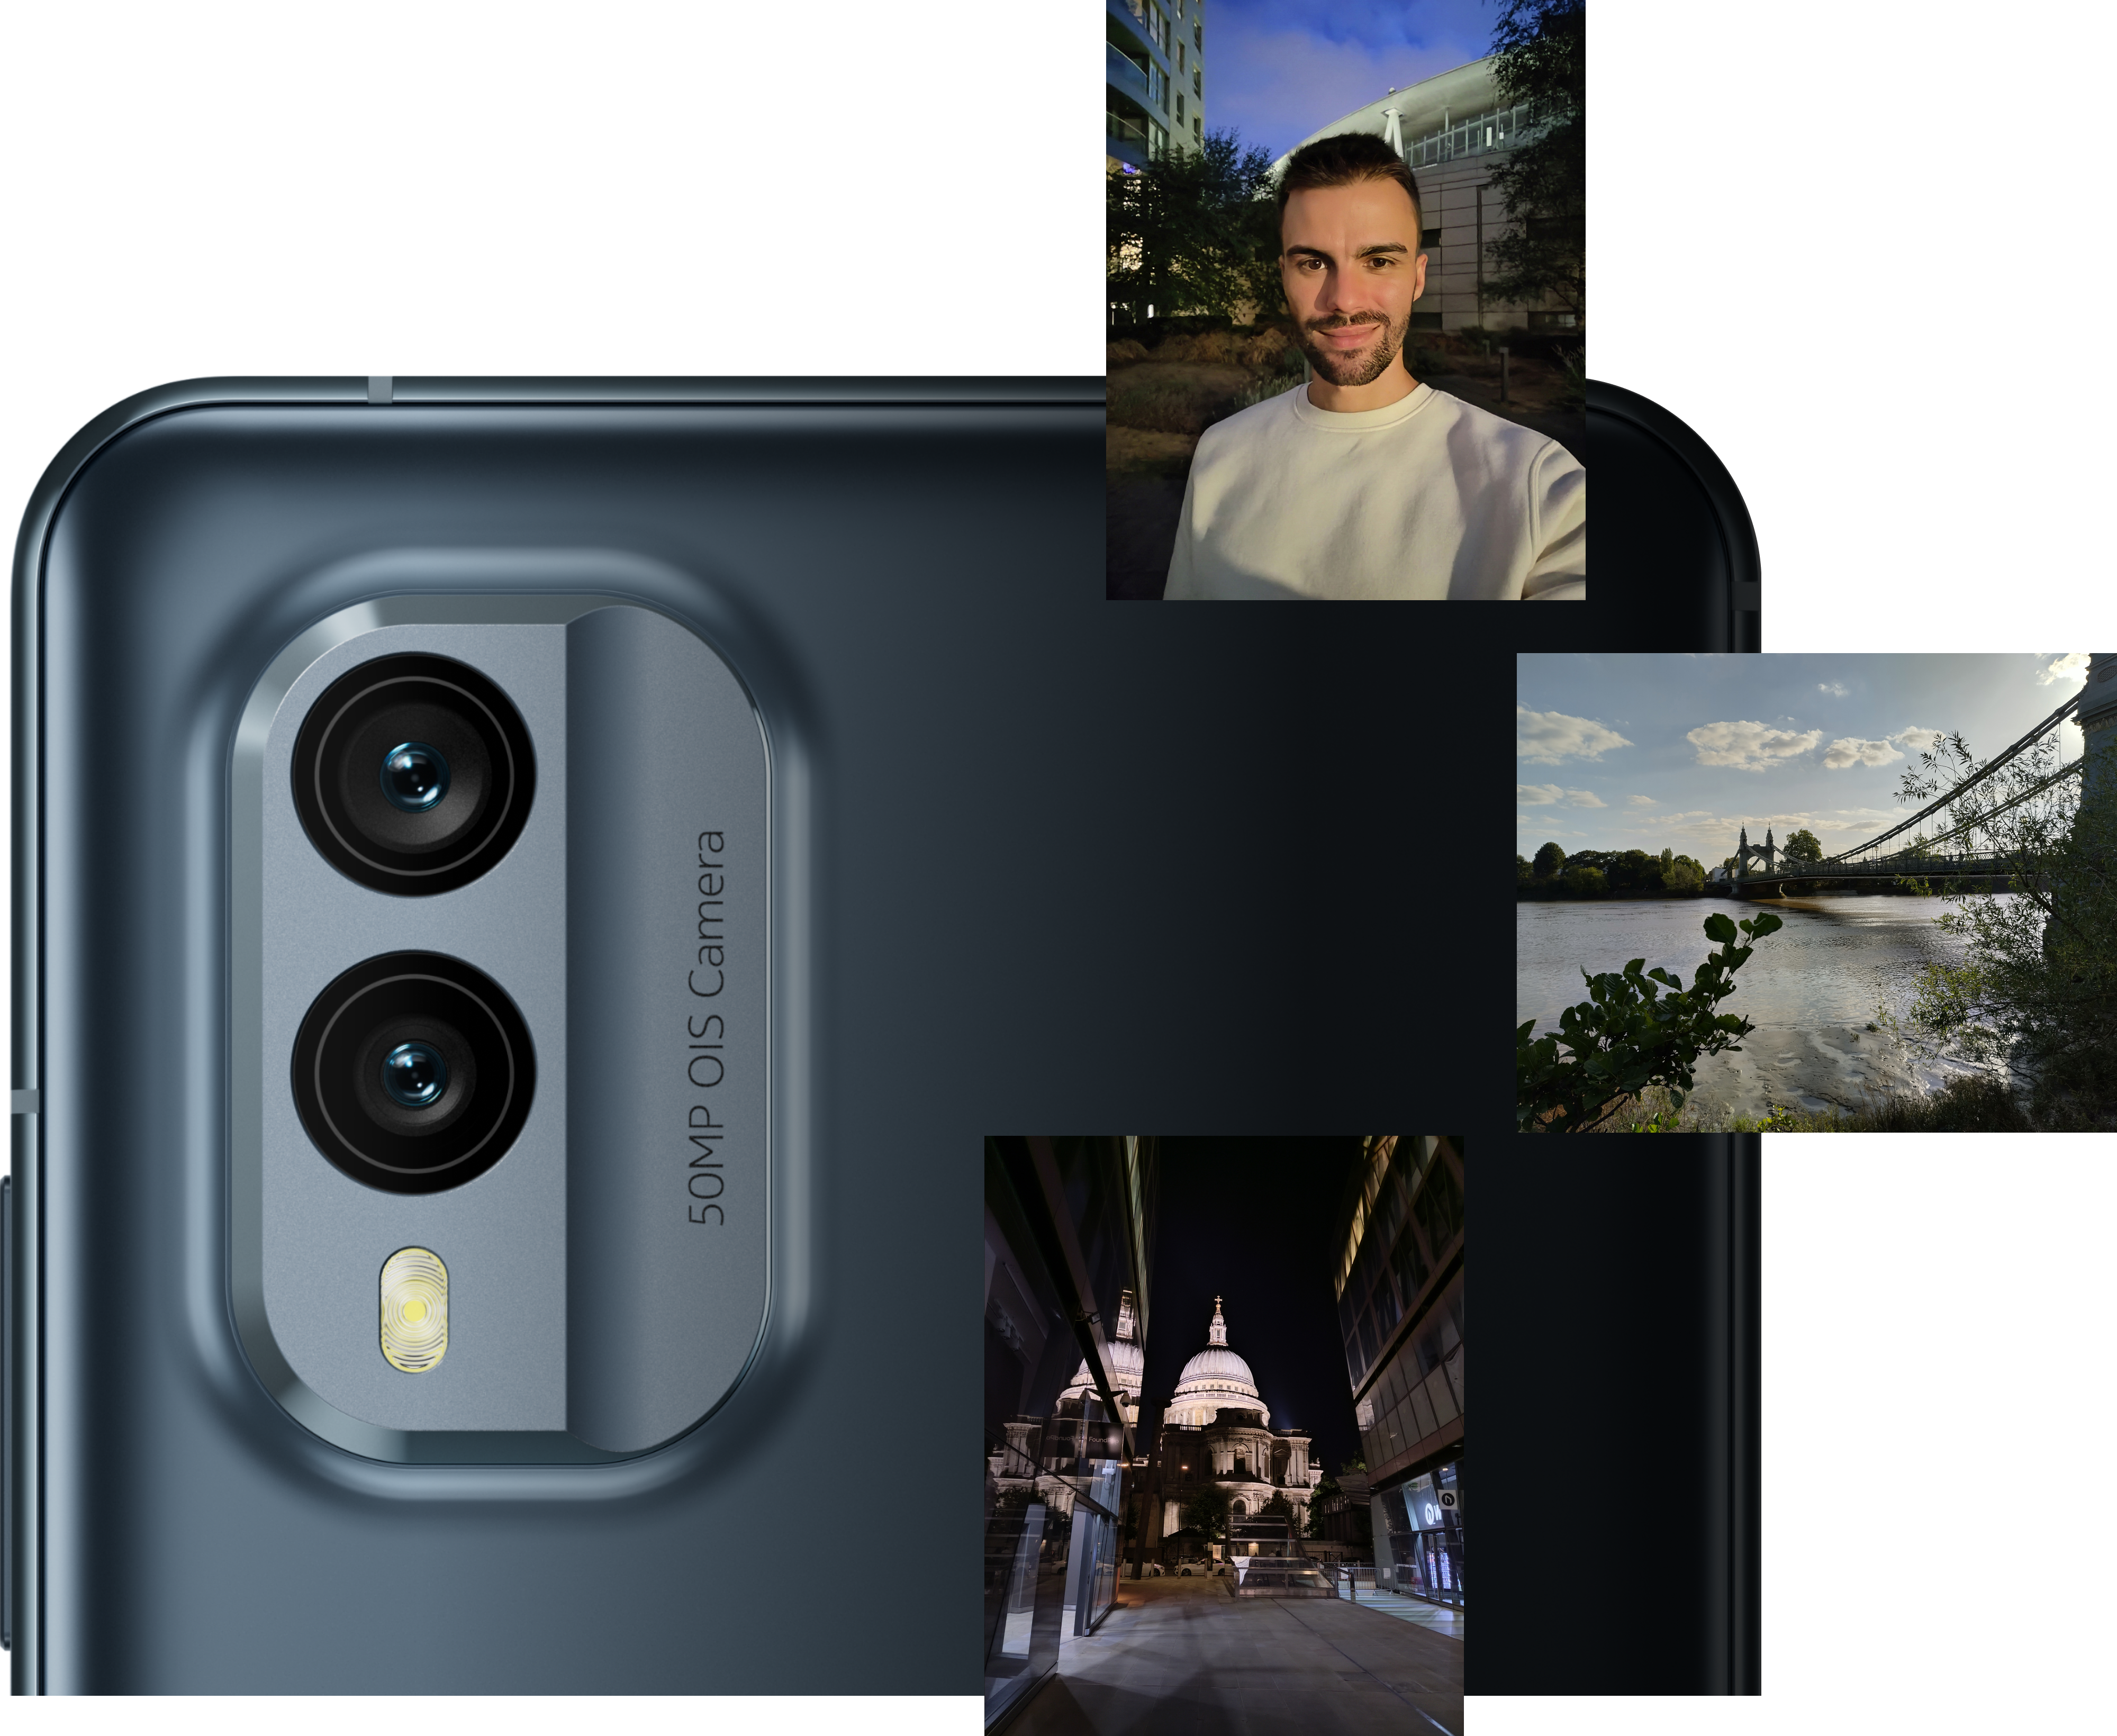 Nokia X30 5G sustainable smartphone with OIS camera